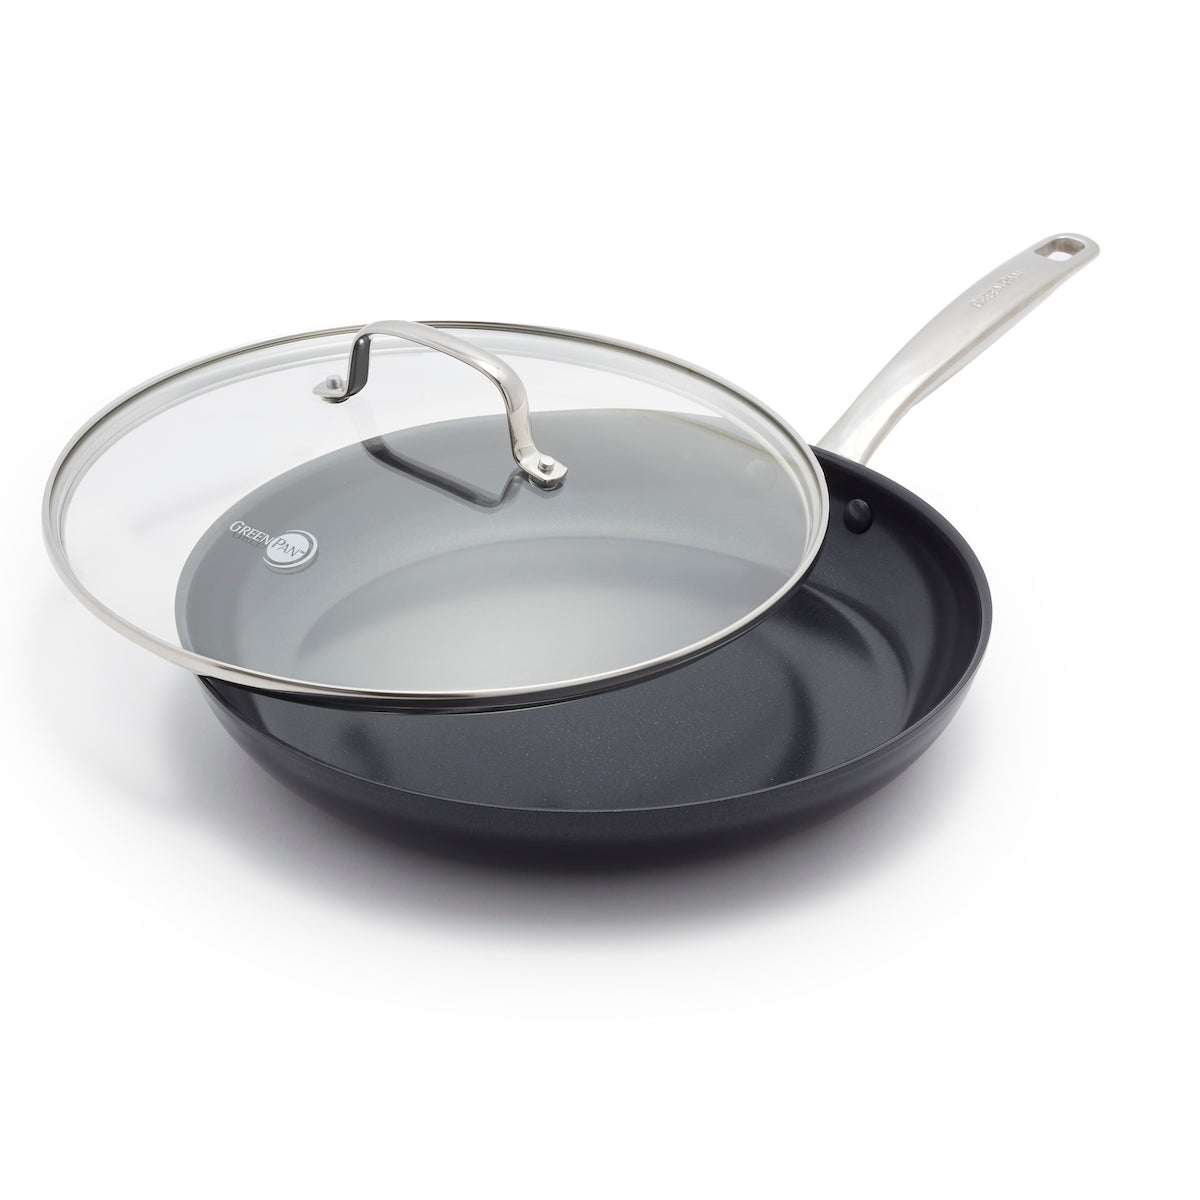 Chatham Black Ceramic Nonstick 12" Frypan with Lid